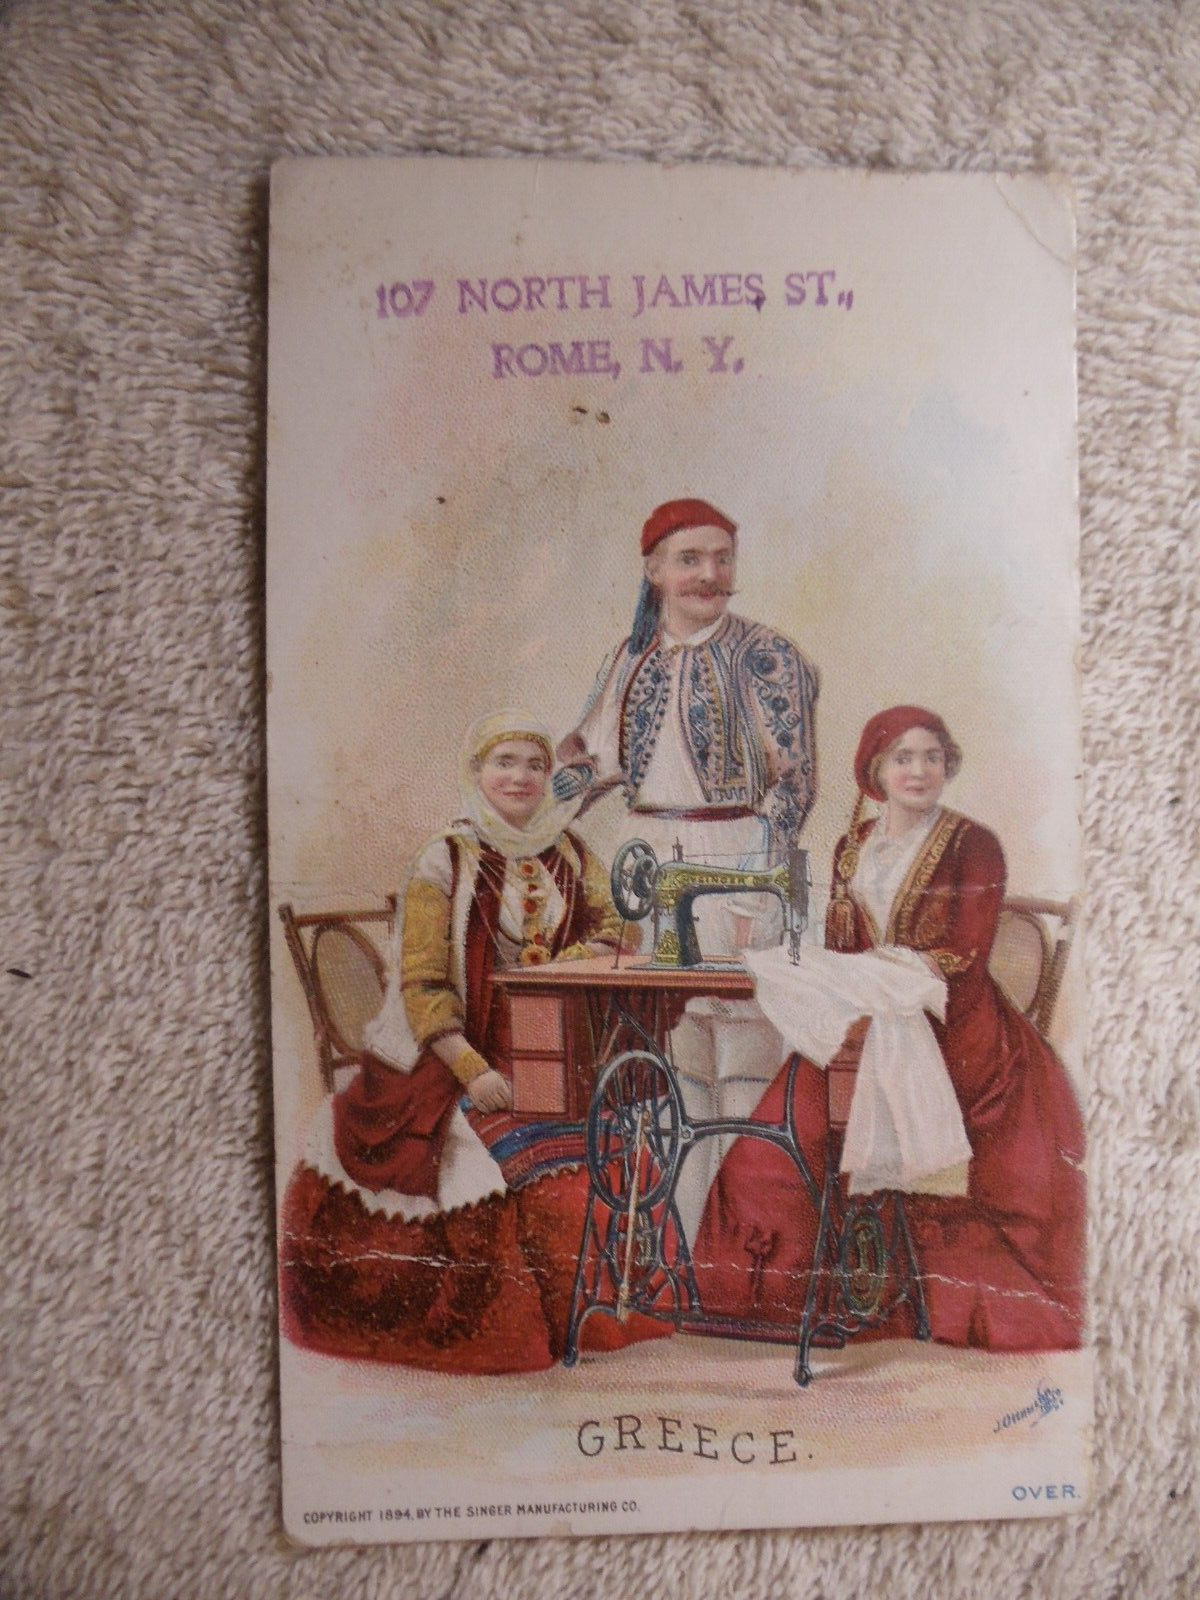  Singer Sewing Manufacturing Co Greece Clothing Victorian Trade Card ROME, N.Y.